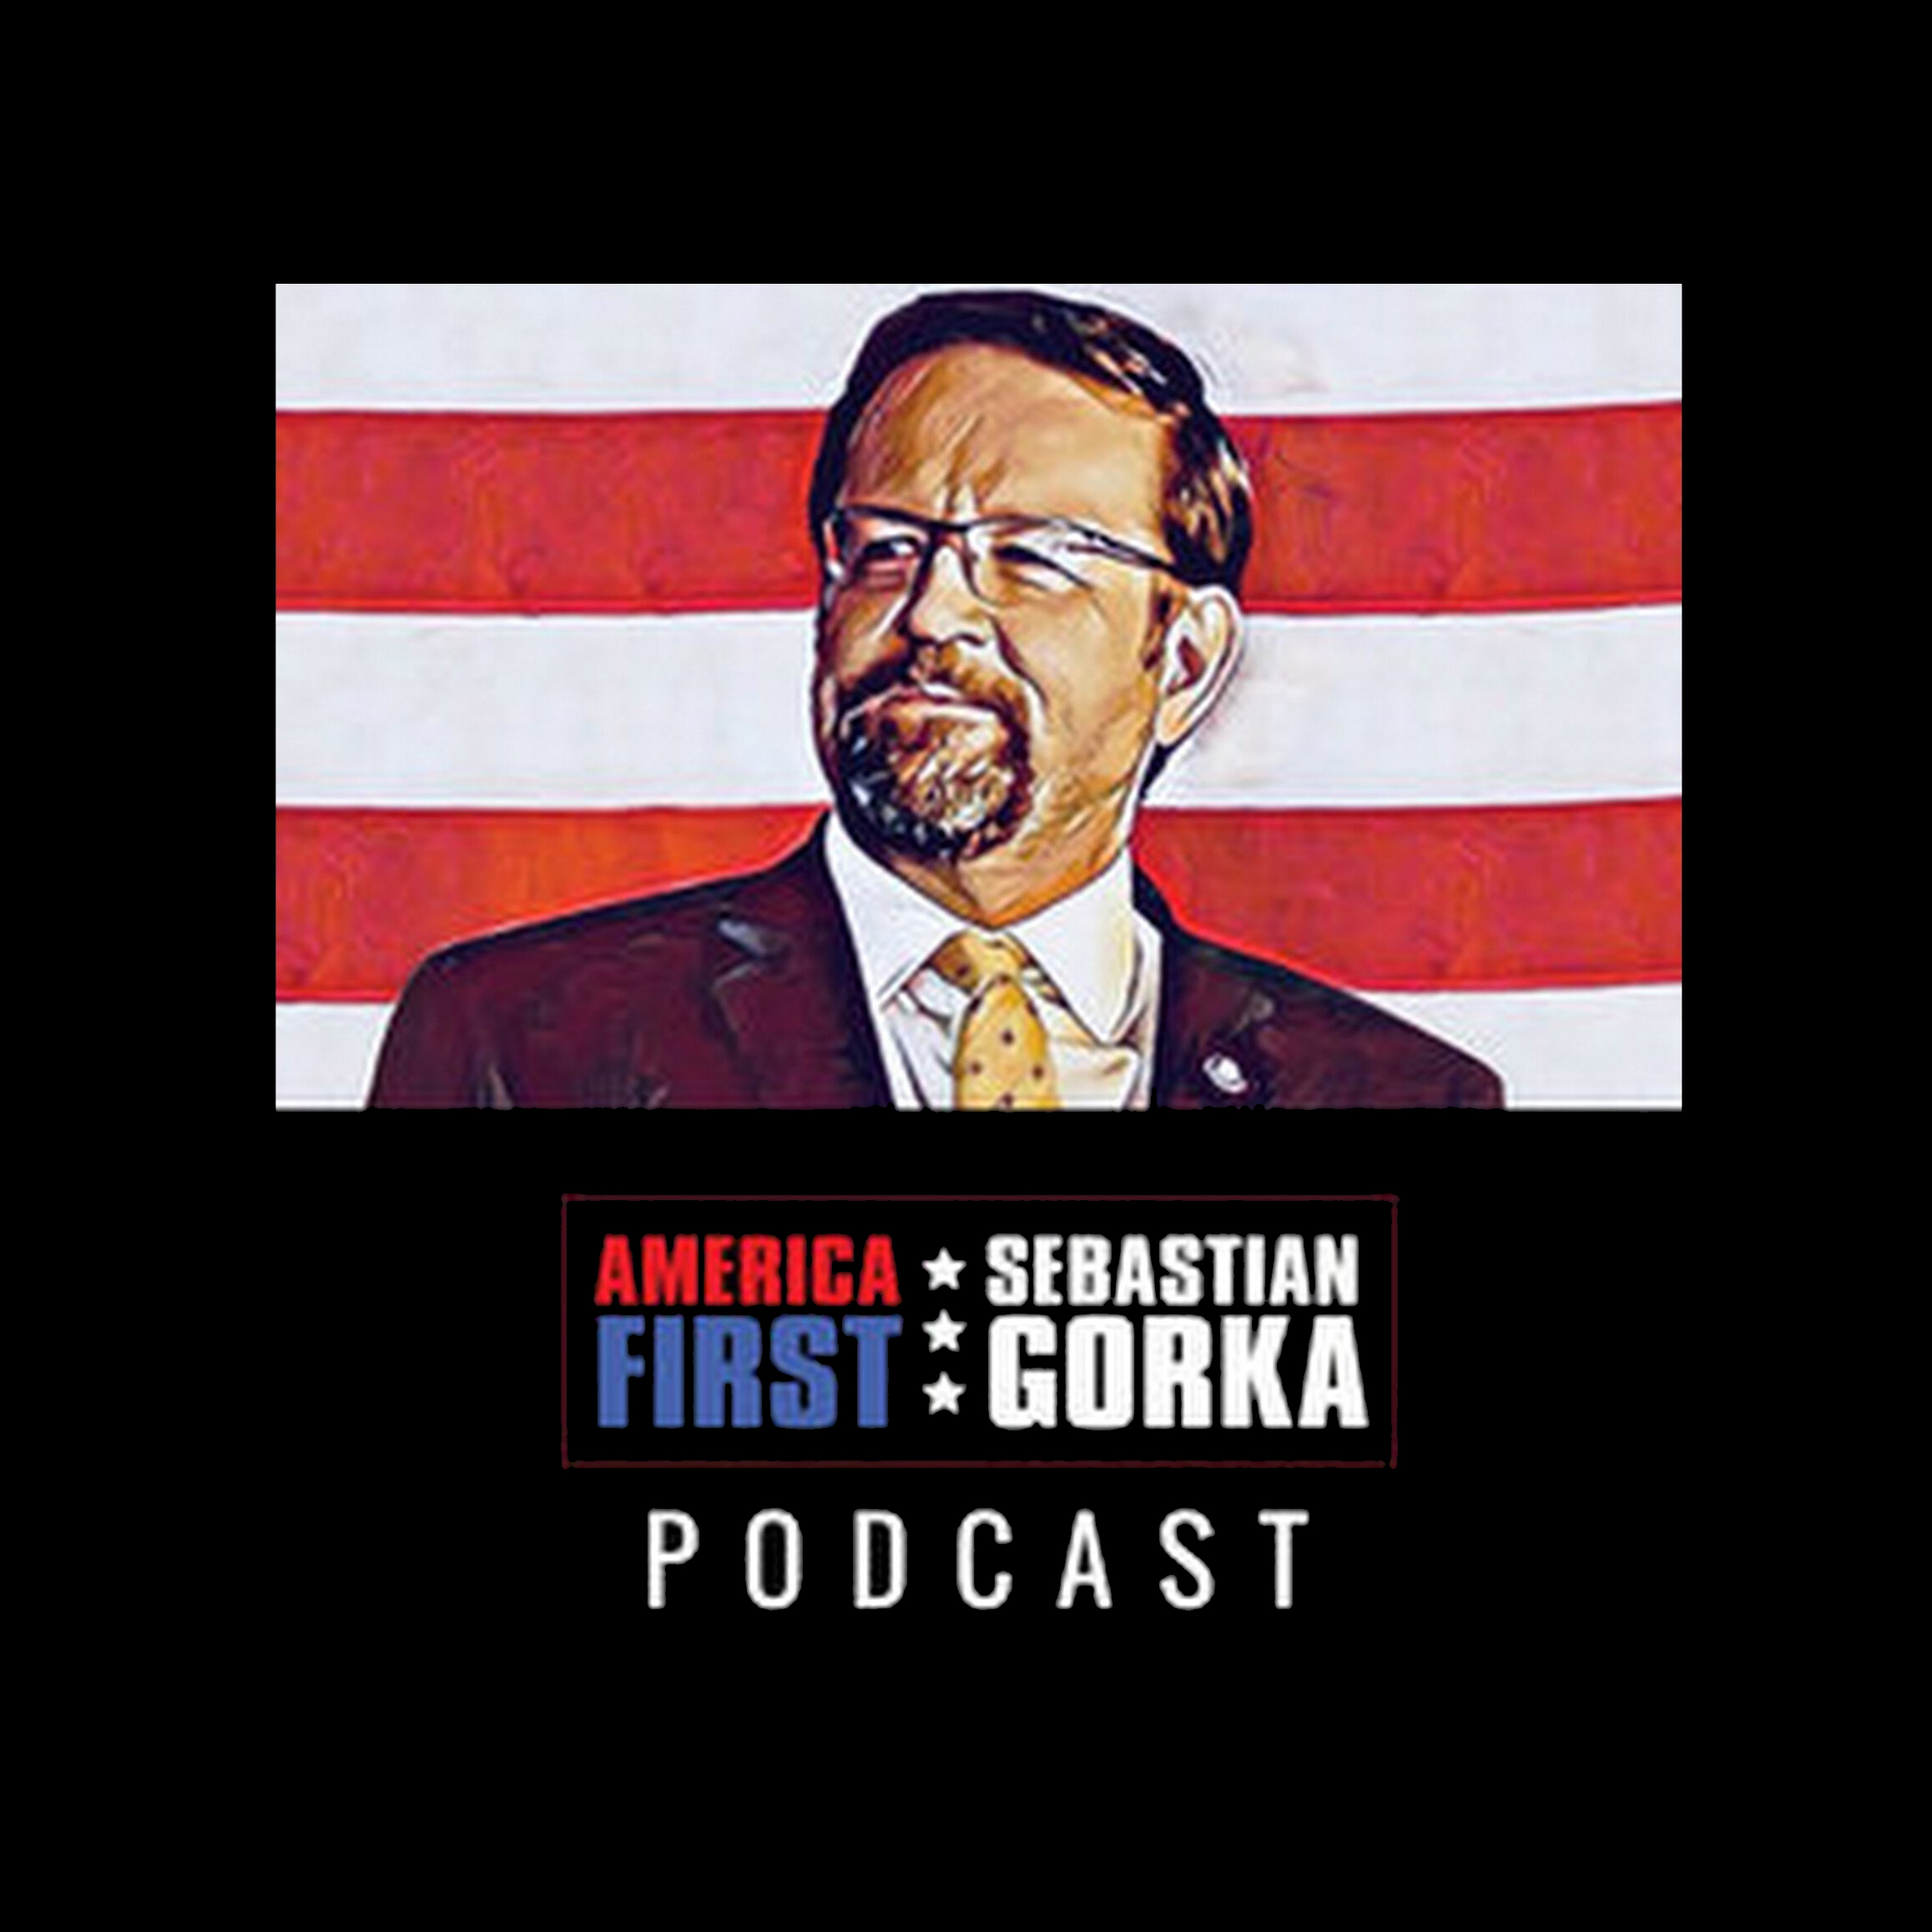 Lord Conrad Black, Kyle Seraphin, and Phil Kerpen with Sebastian Gorka on AMERICA First